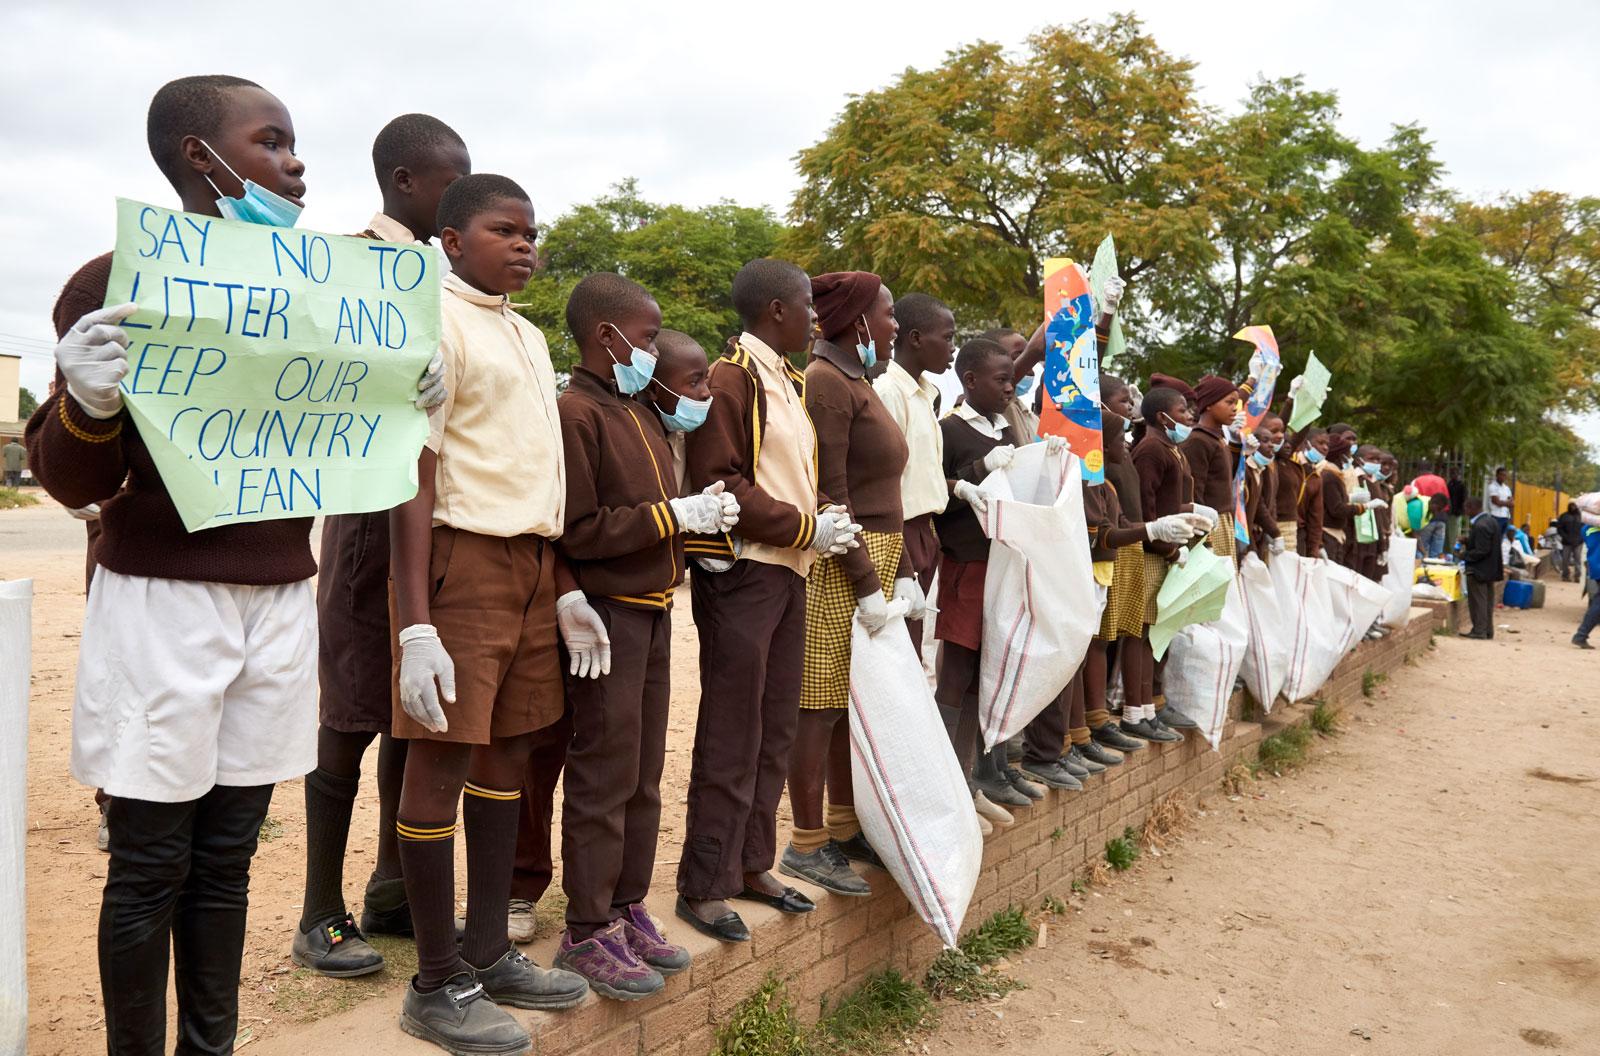 Children demonstrating with signs